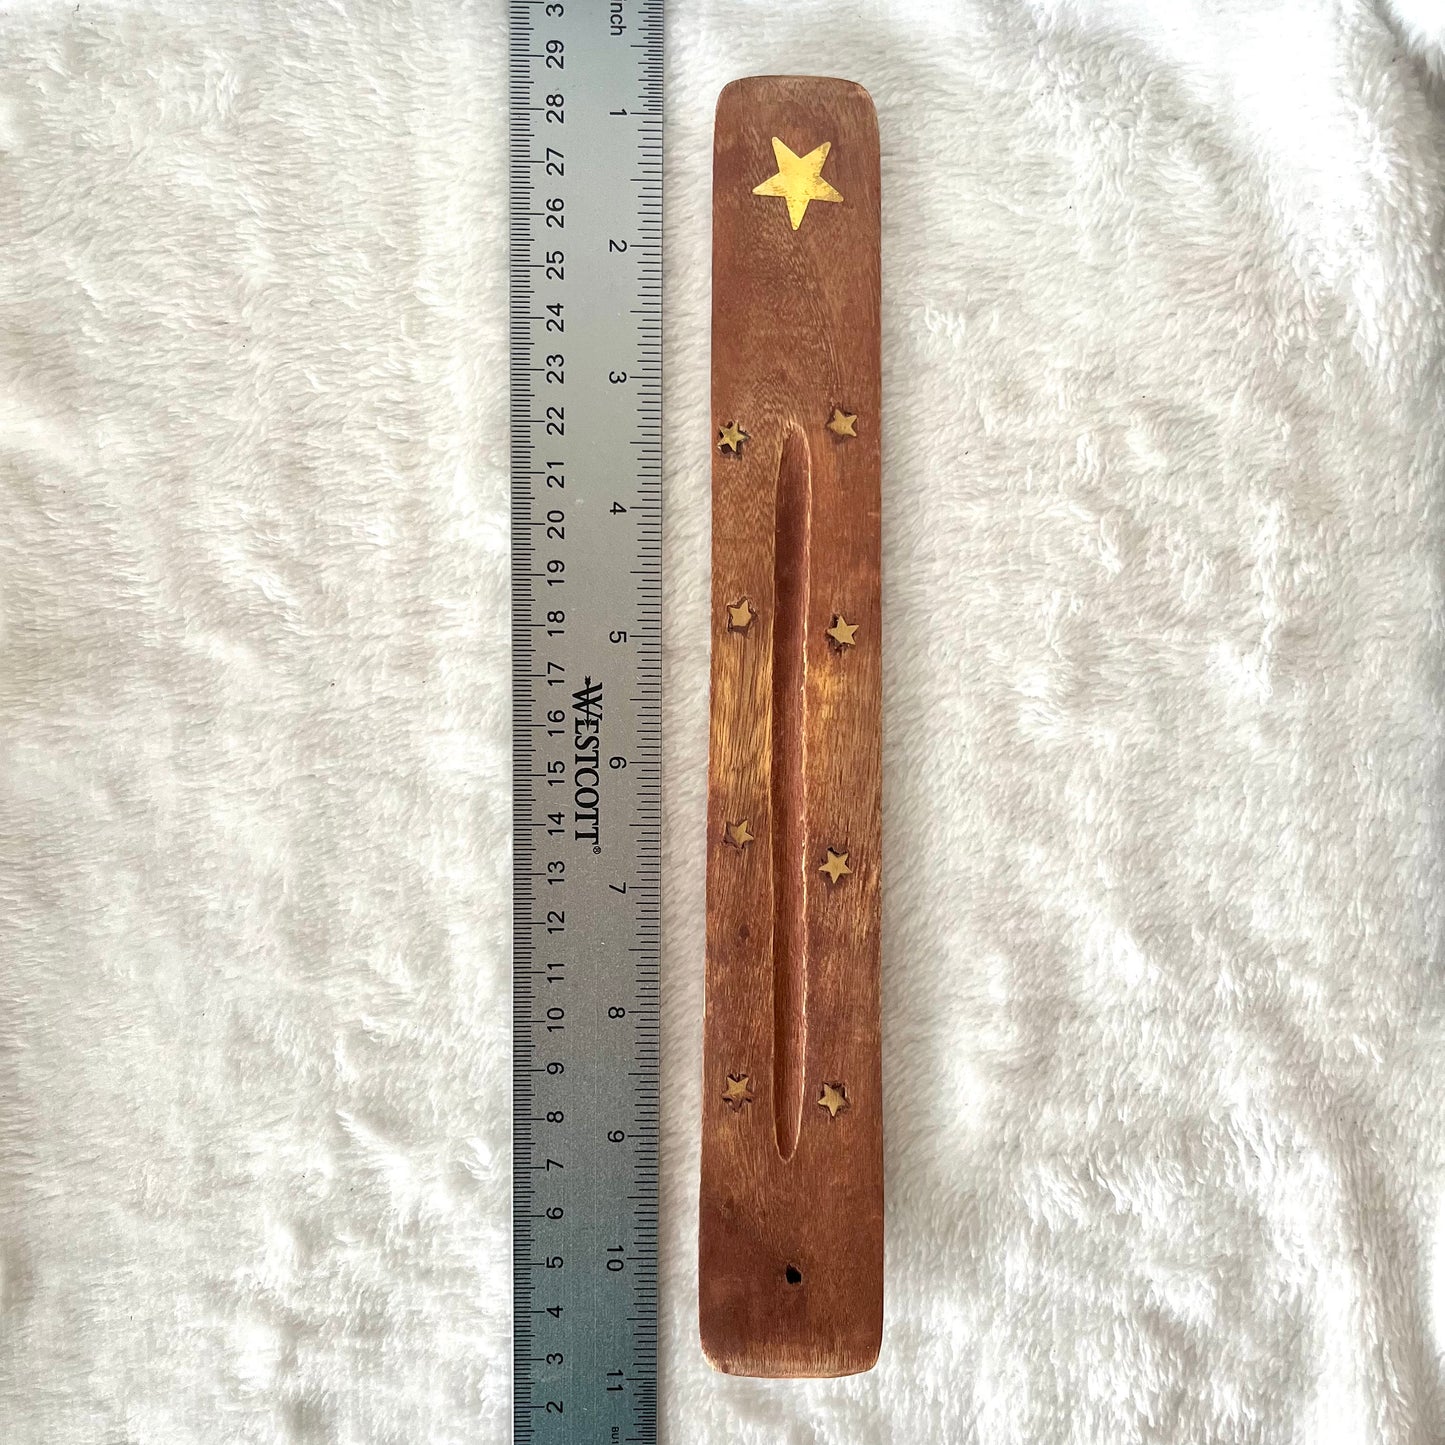 Wooden Incense Tray, Gold Star 1644